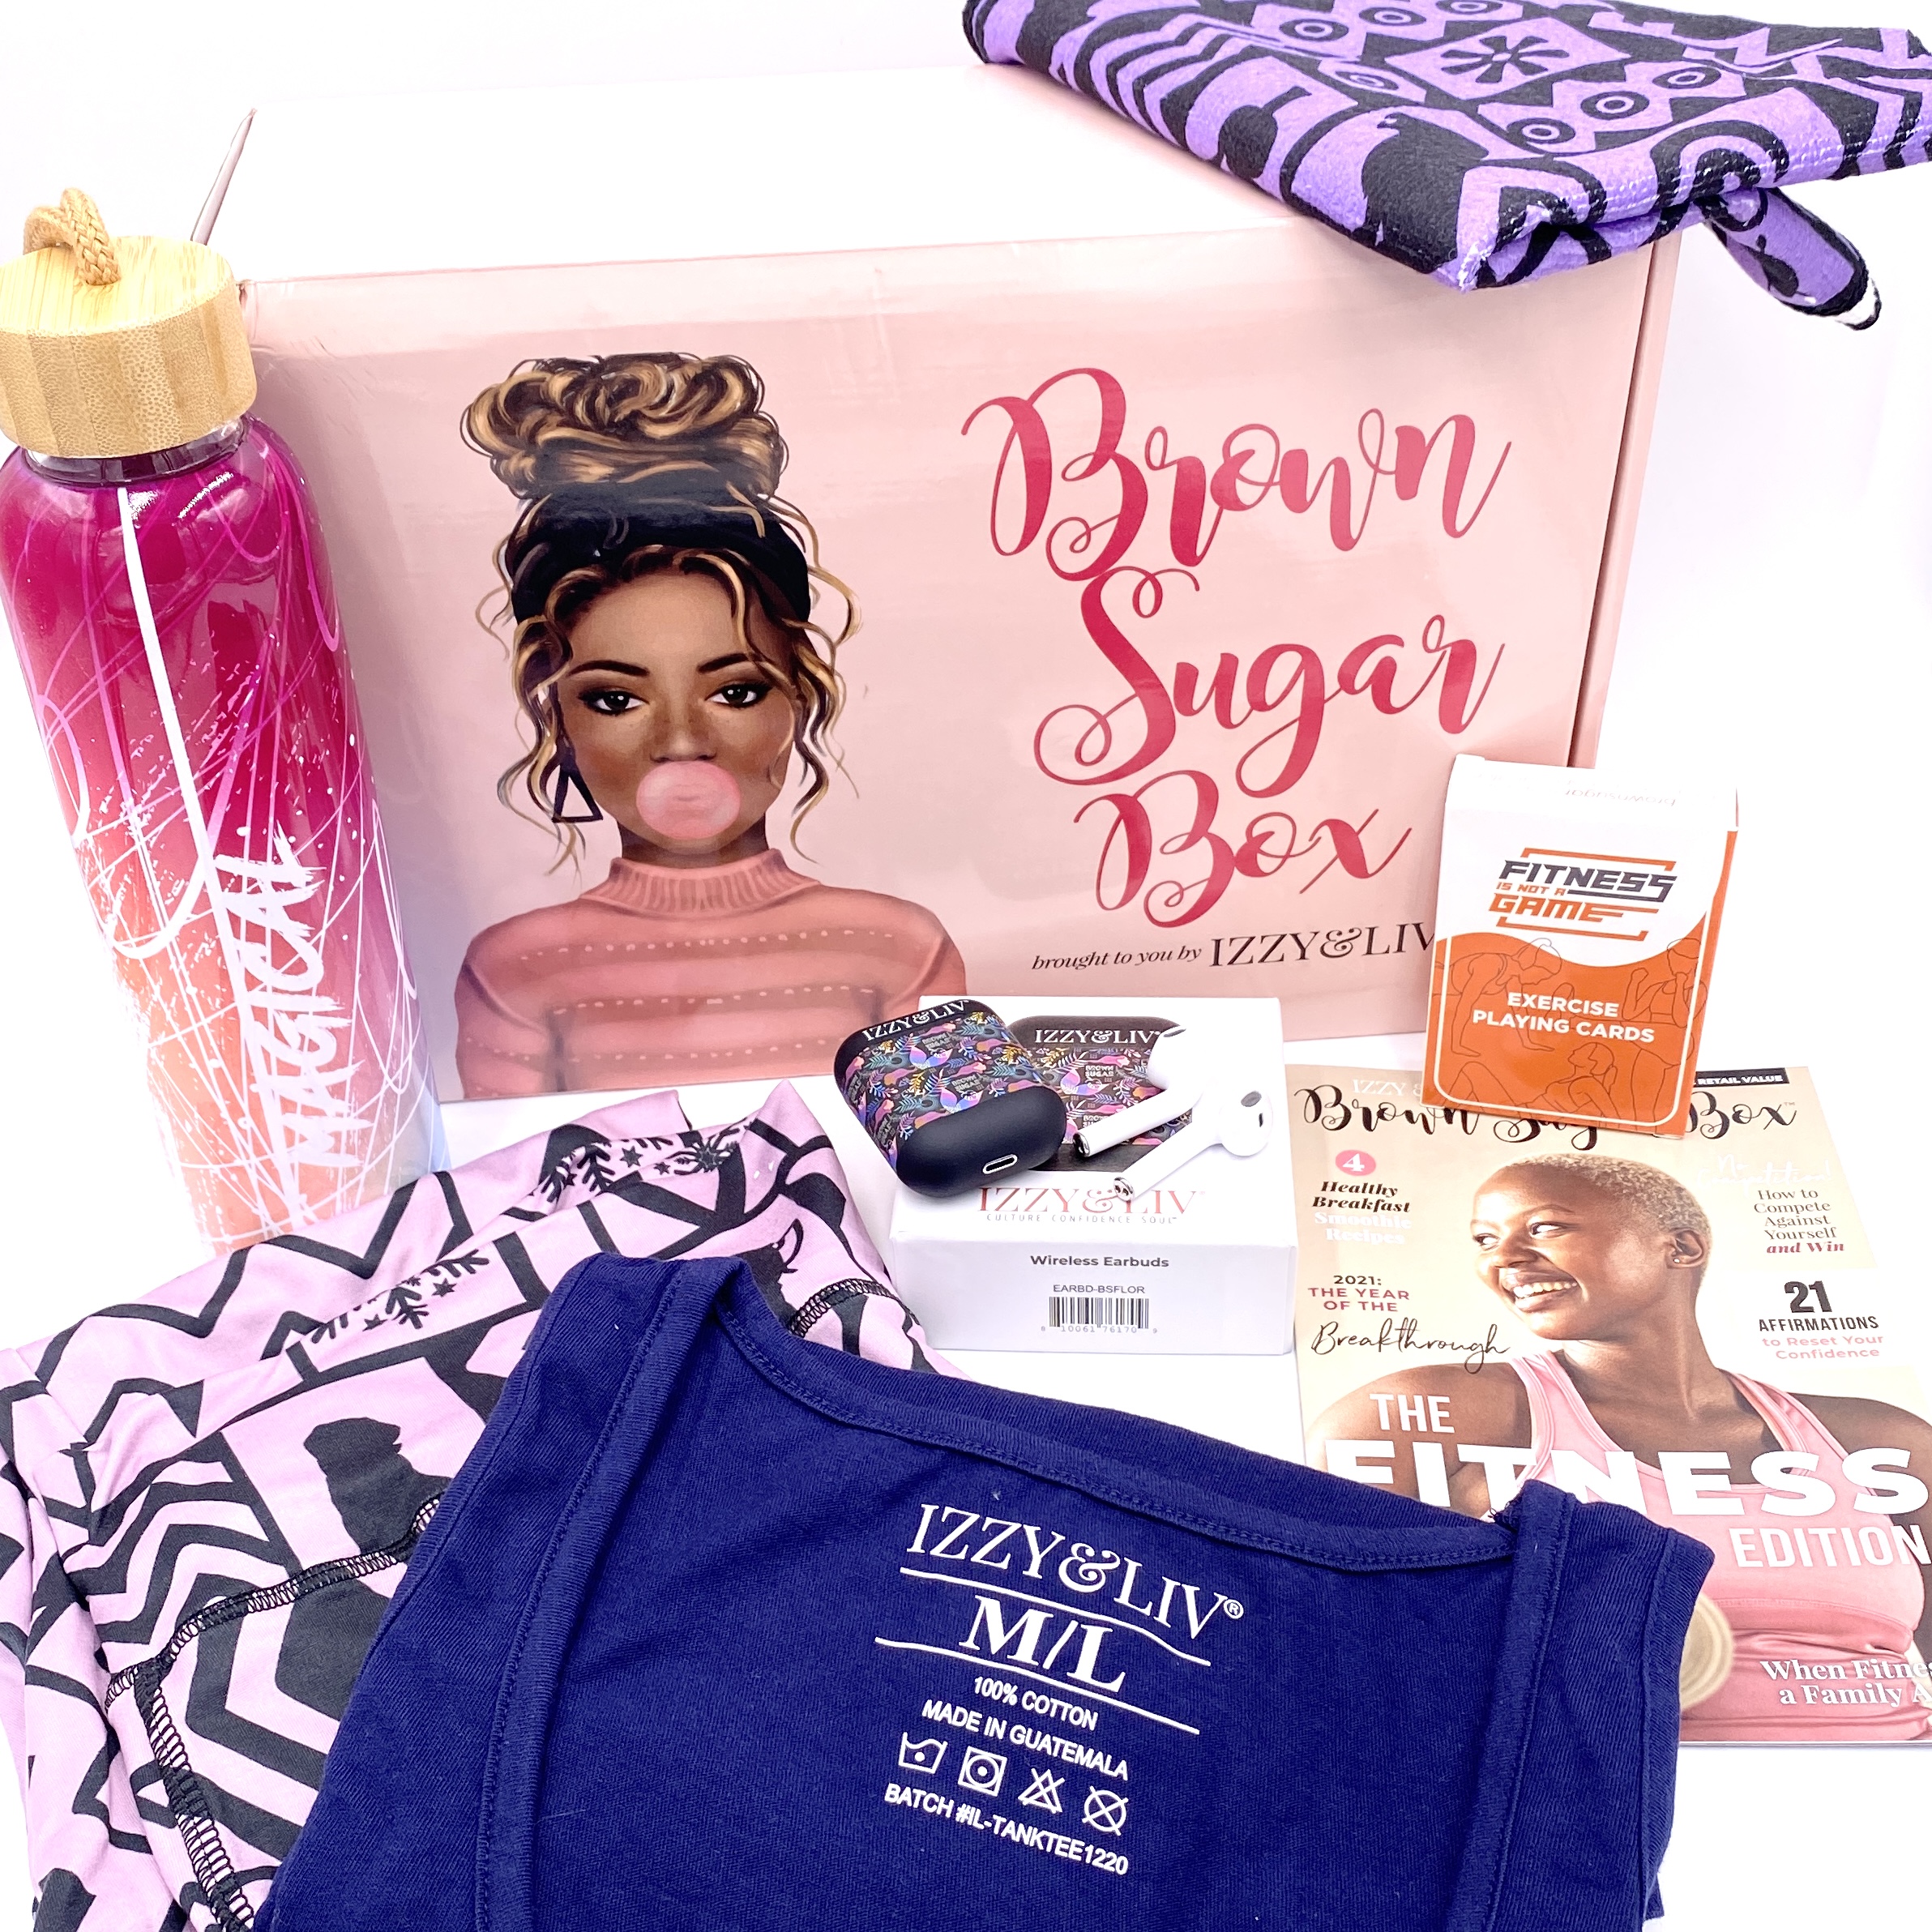 Full Contents for Brown Sugar Box January 2021